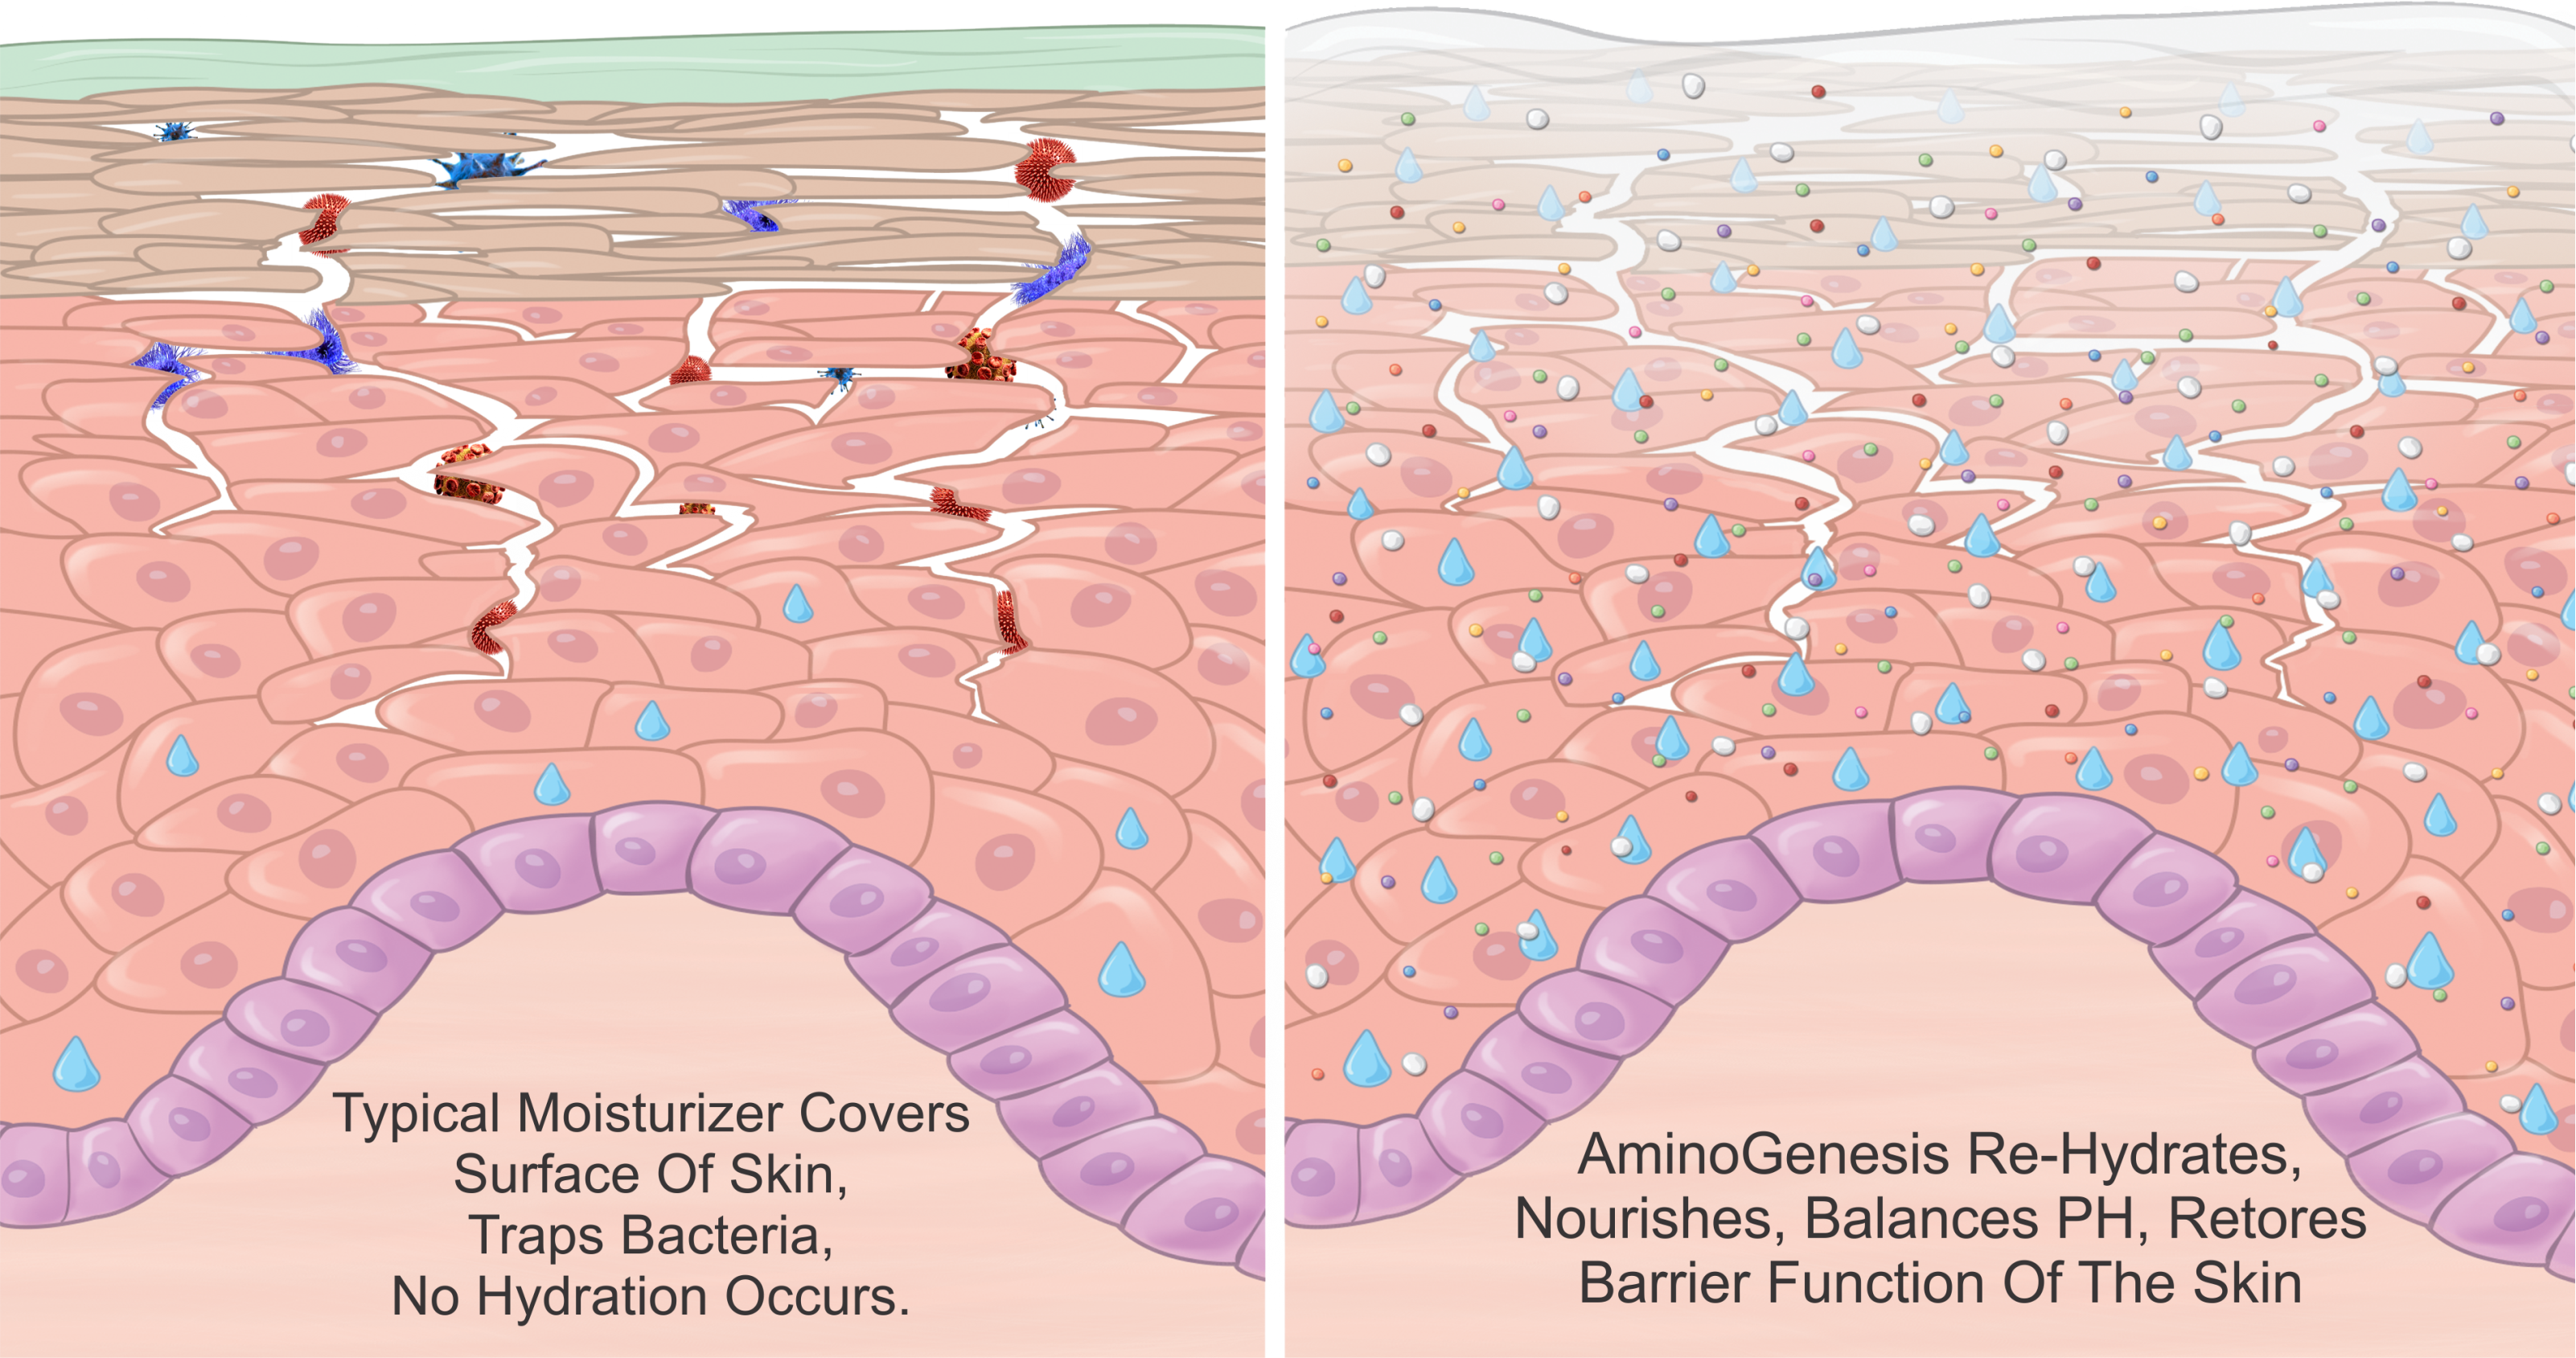 Illustration showing the difference in hydration between the typical moisturizer versus AminoGenesis